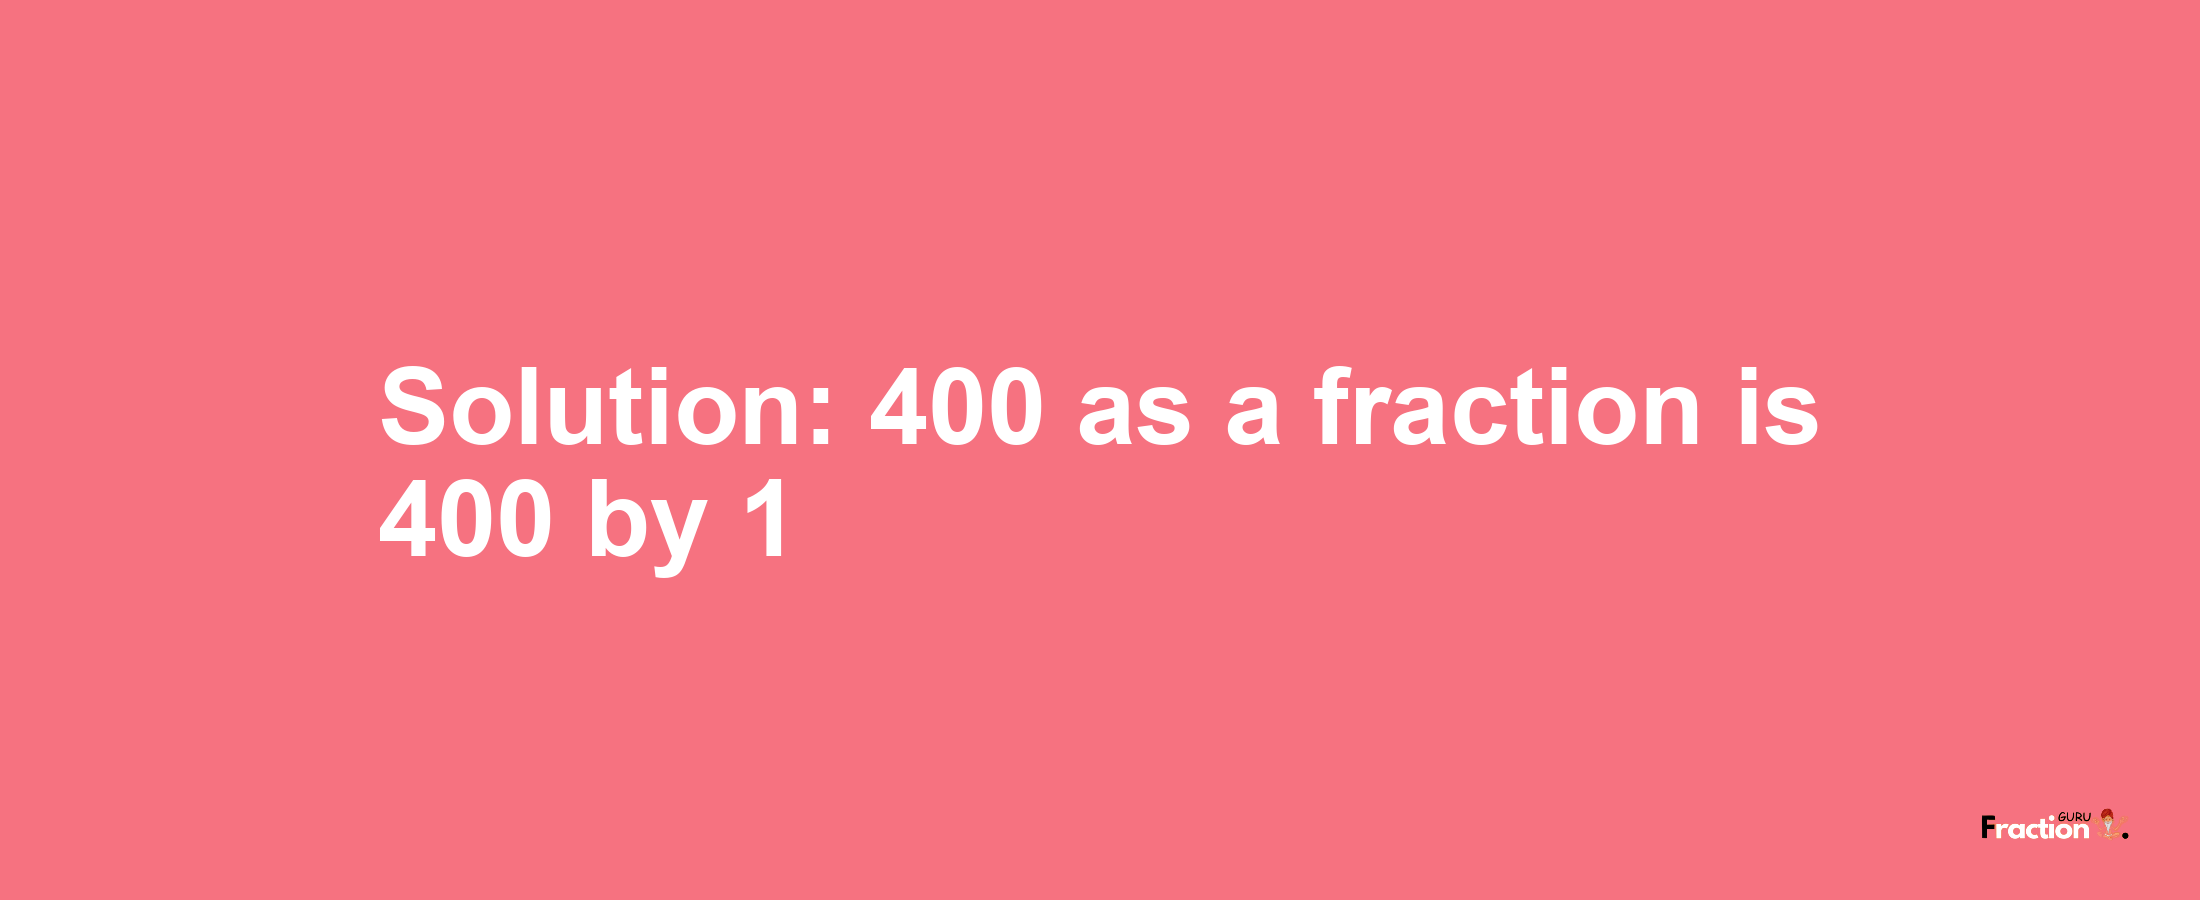 Solution:400 as a fraction is 400/1